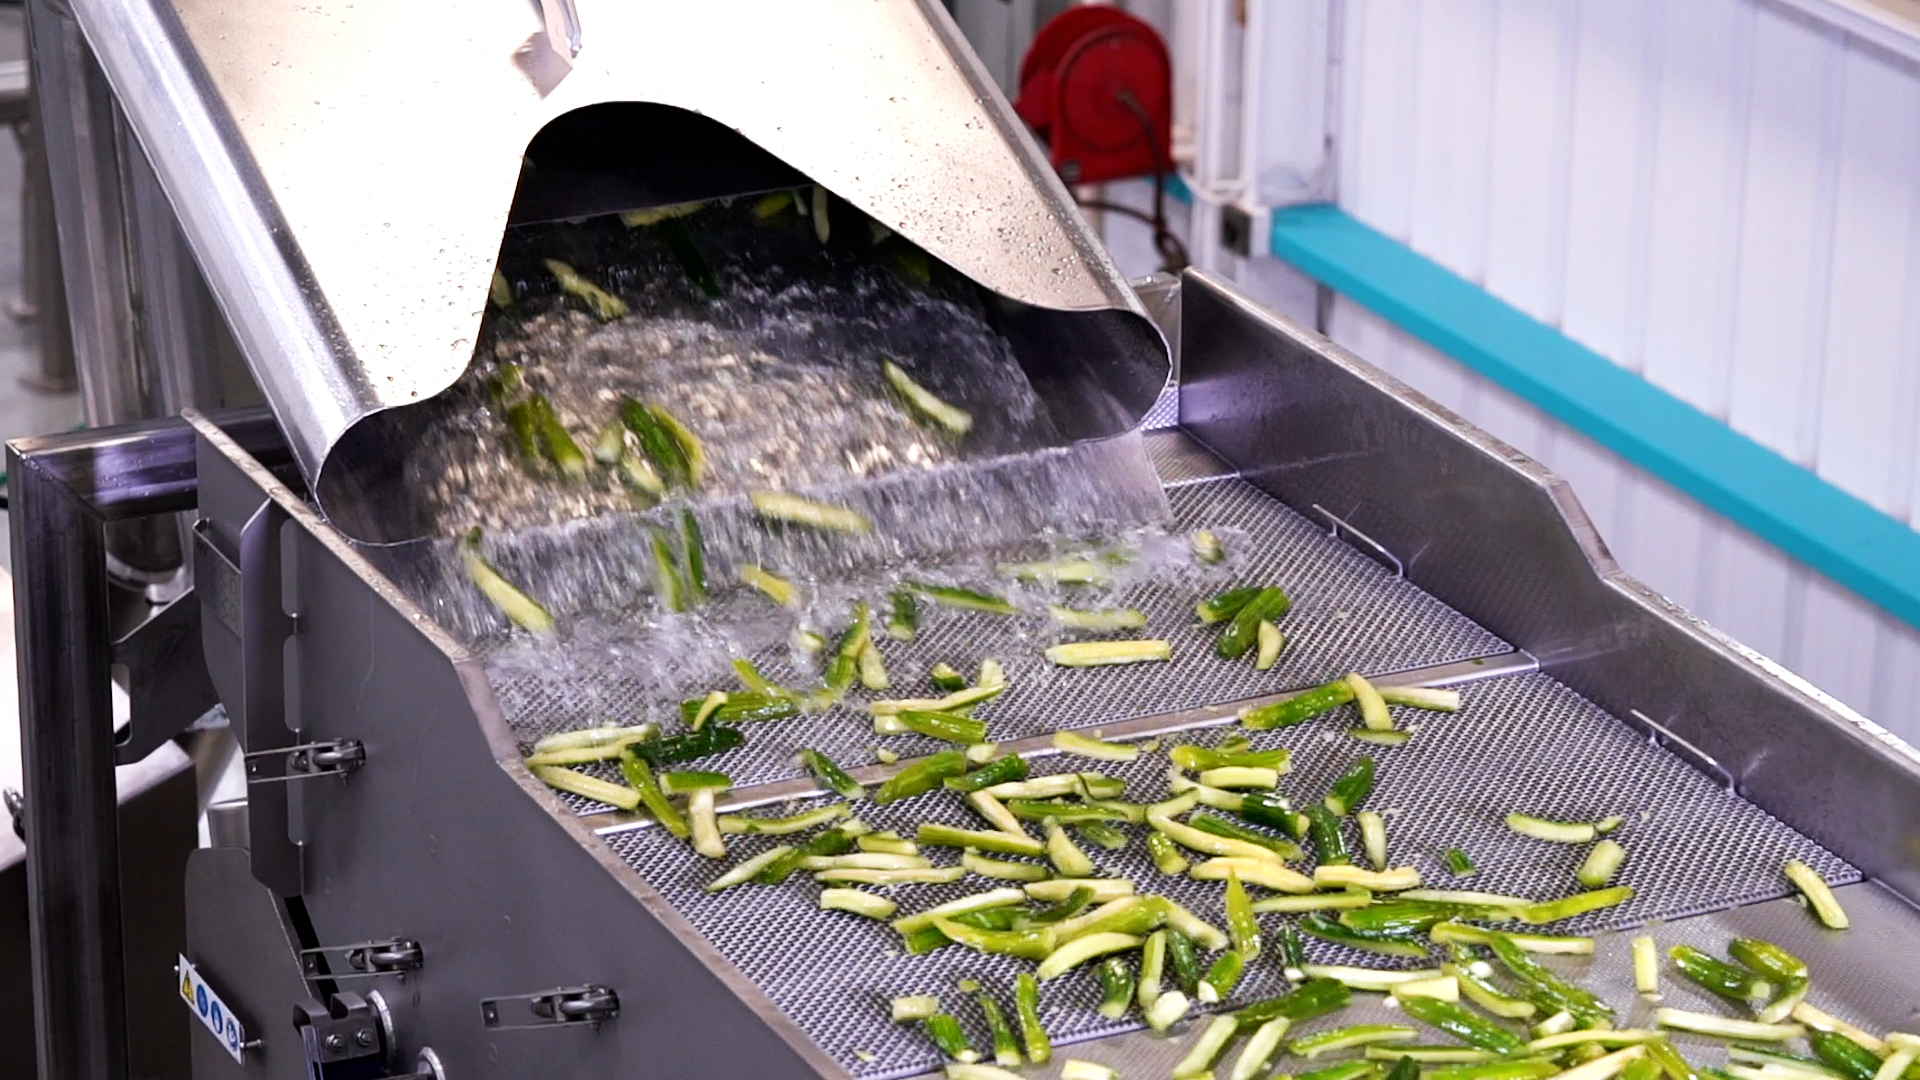 A large batch of cucumbers being washed.